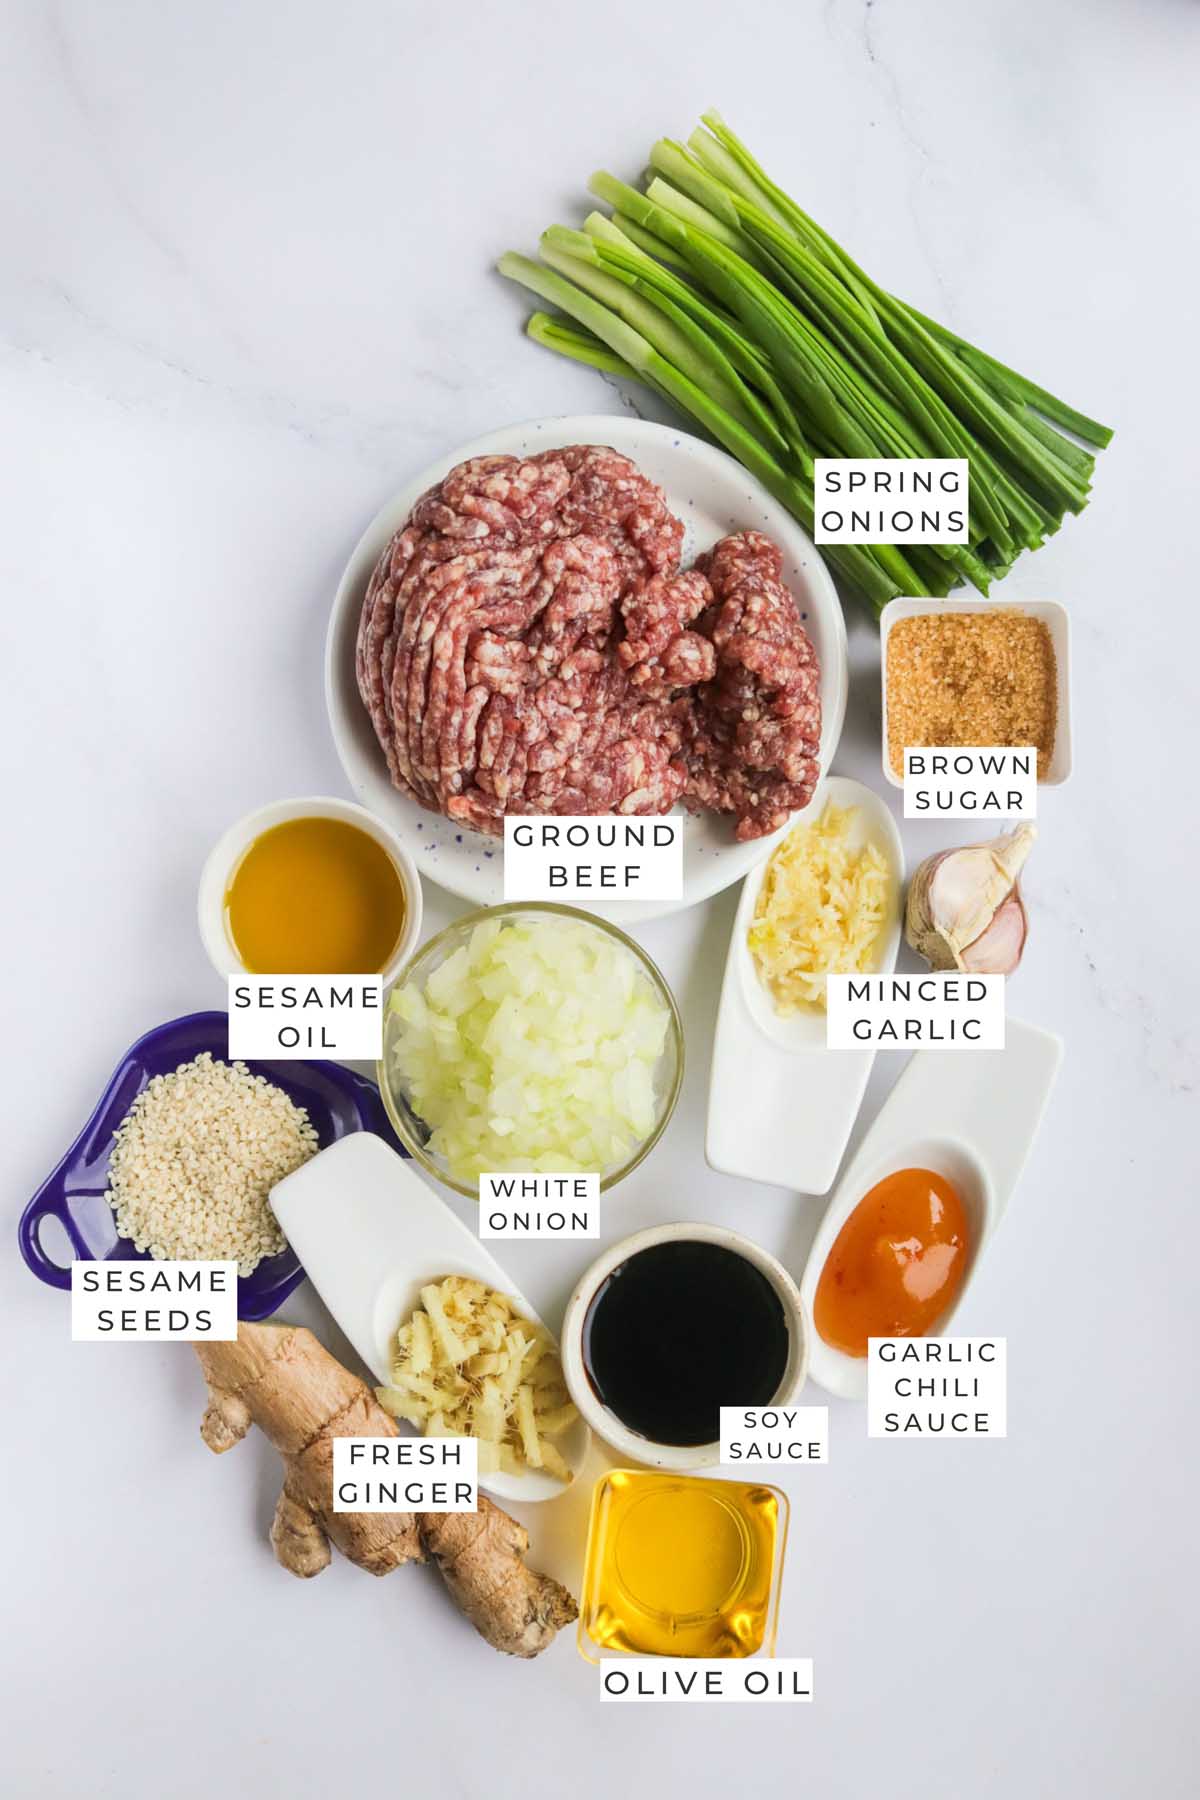 Labeled ingredients for the beef.